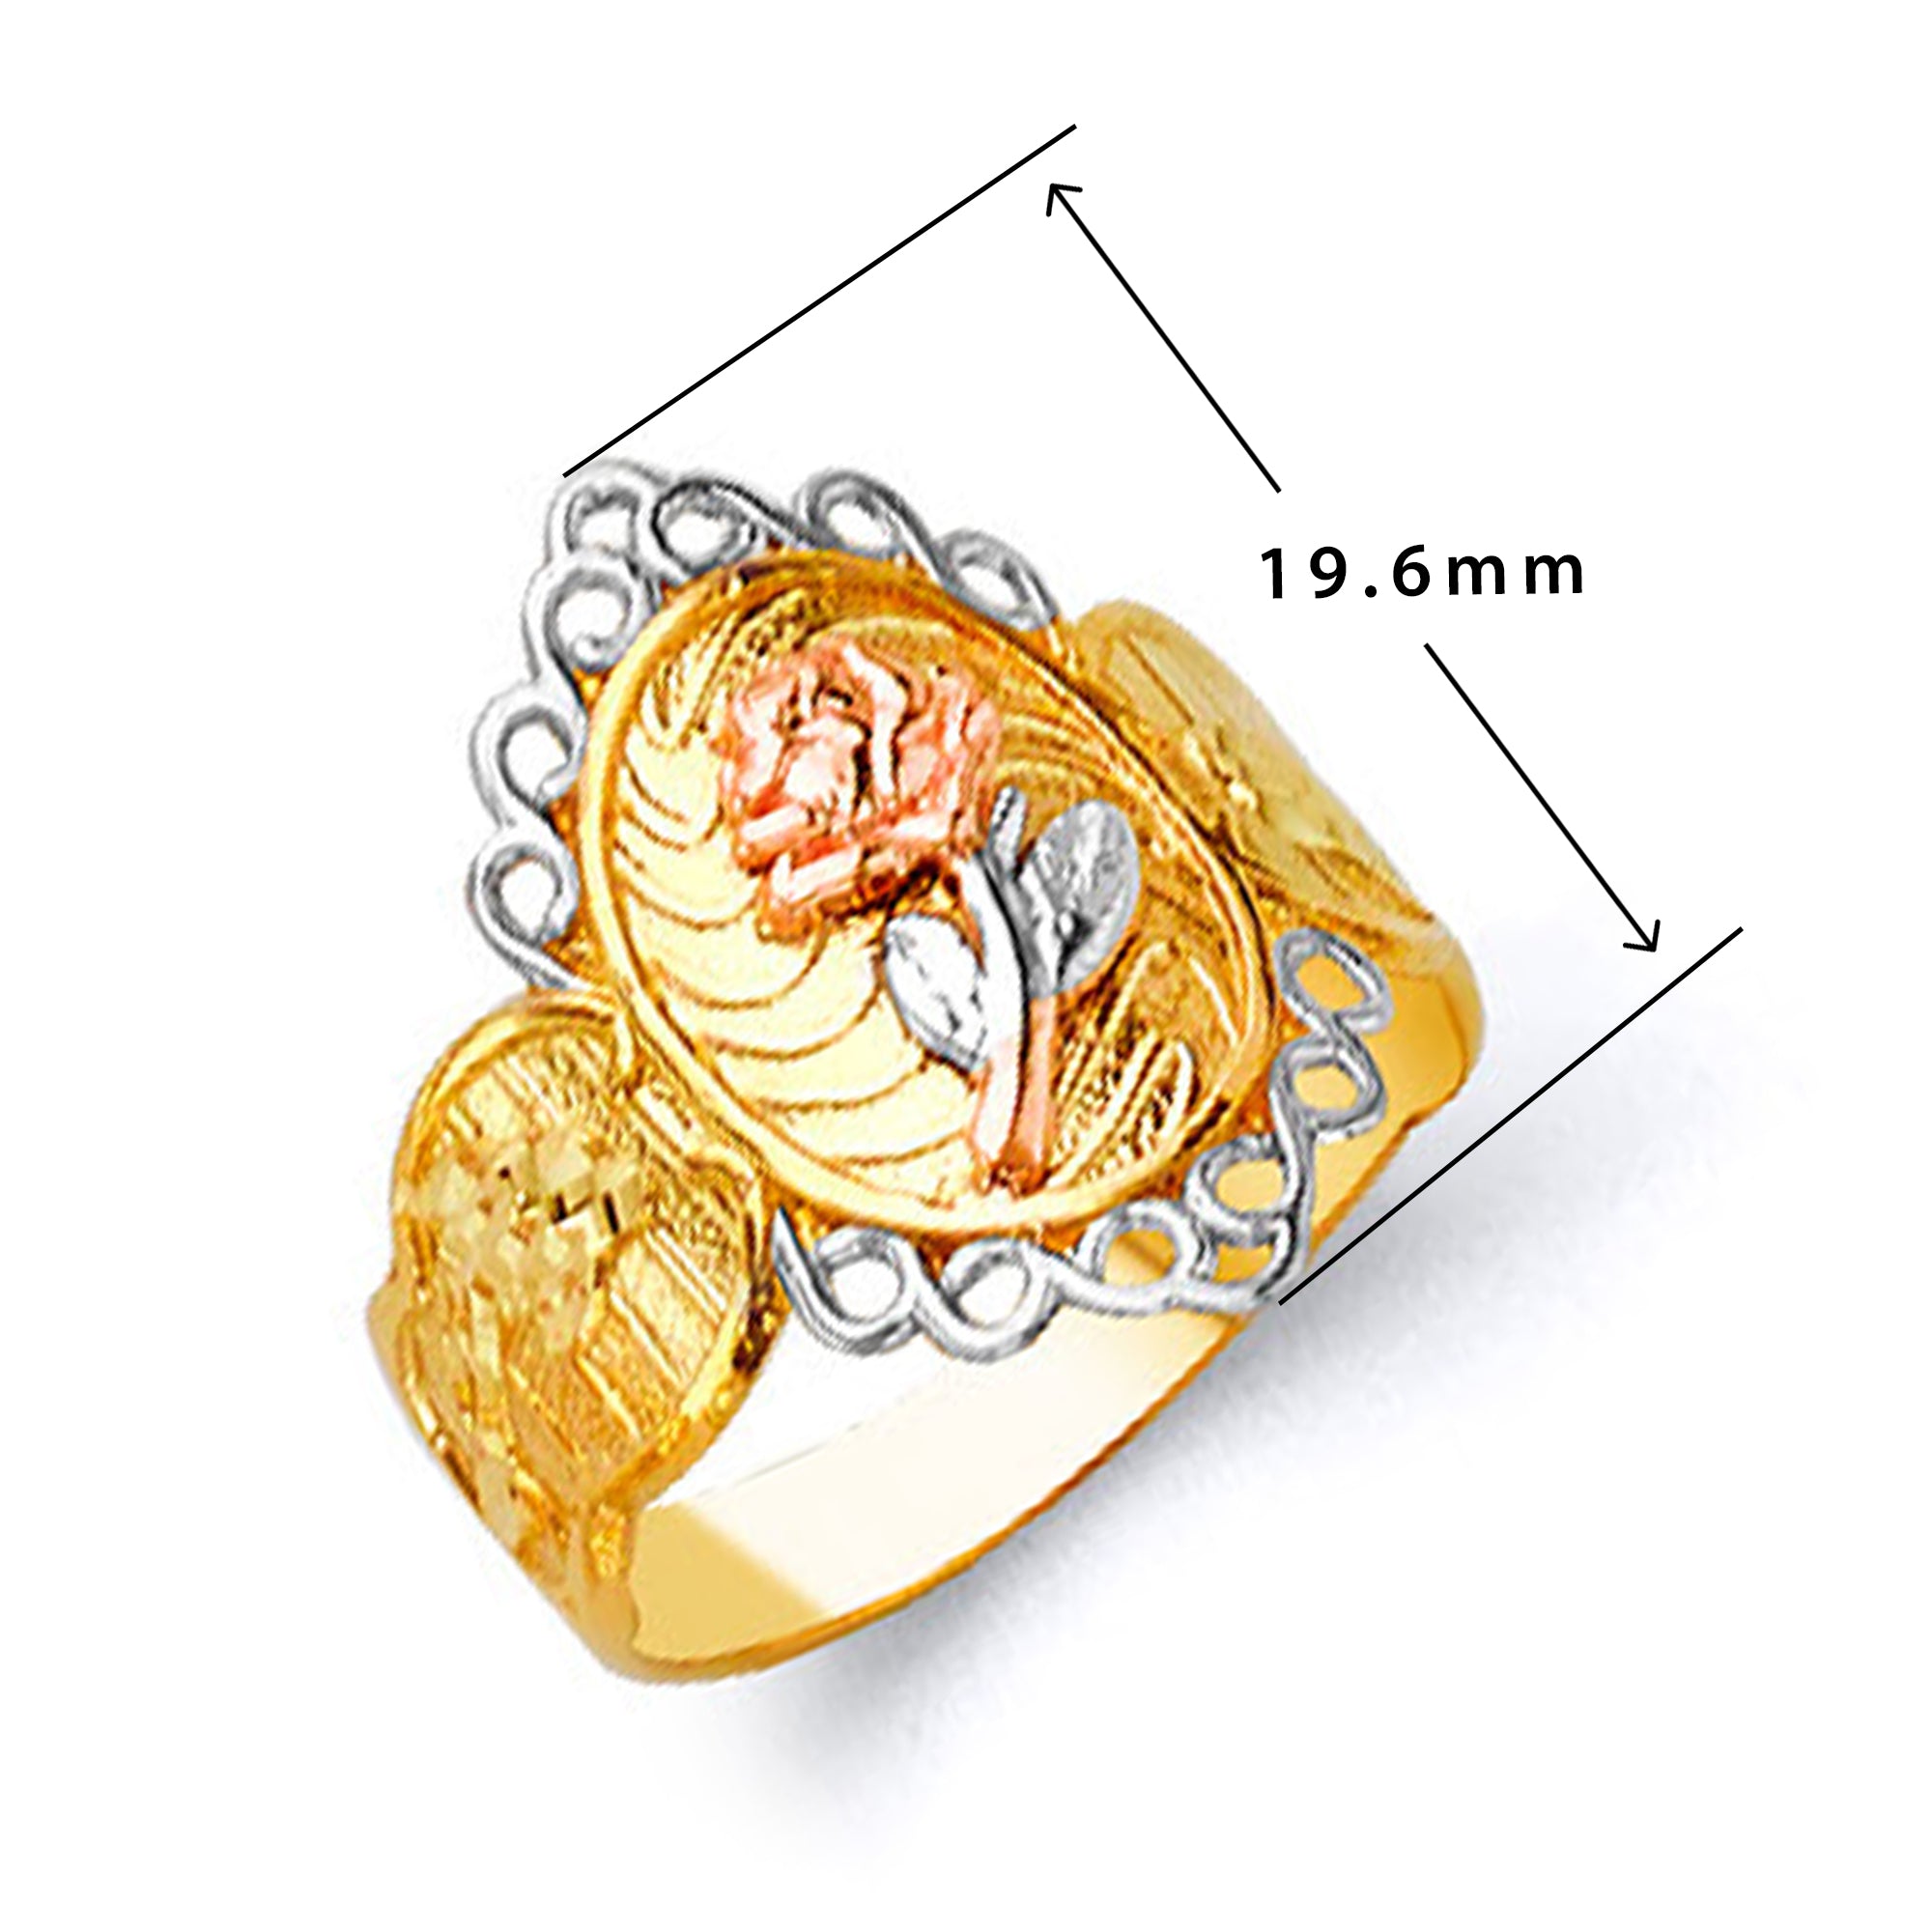 Monarchical Casted Rose Motif Ring in Solid Gold with Measurement